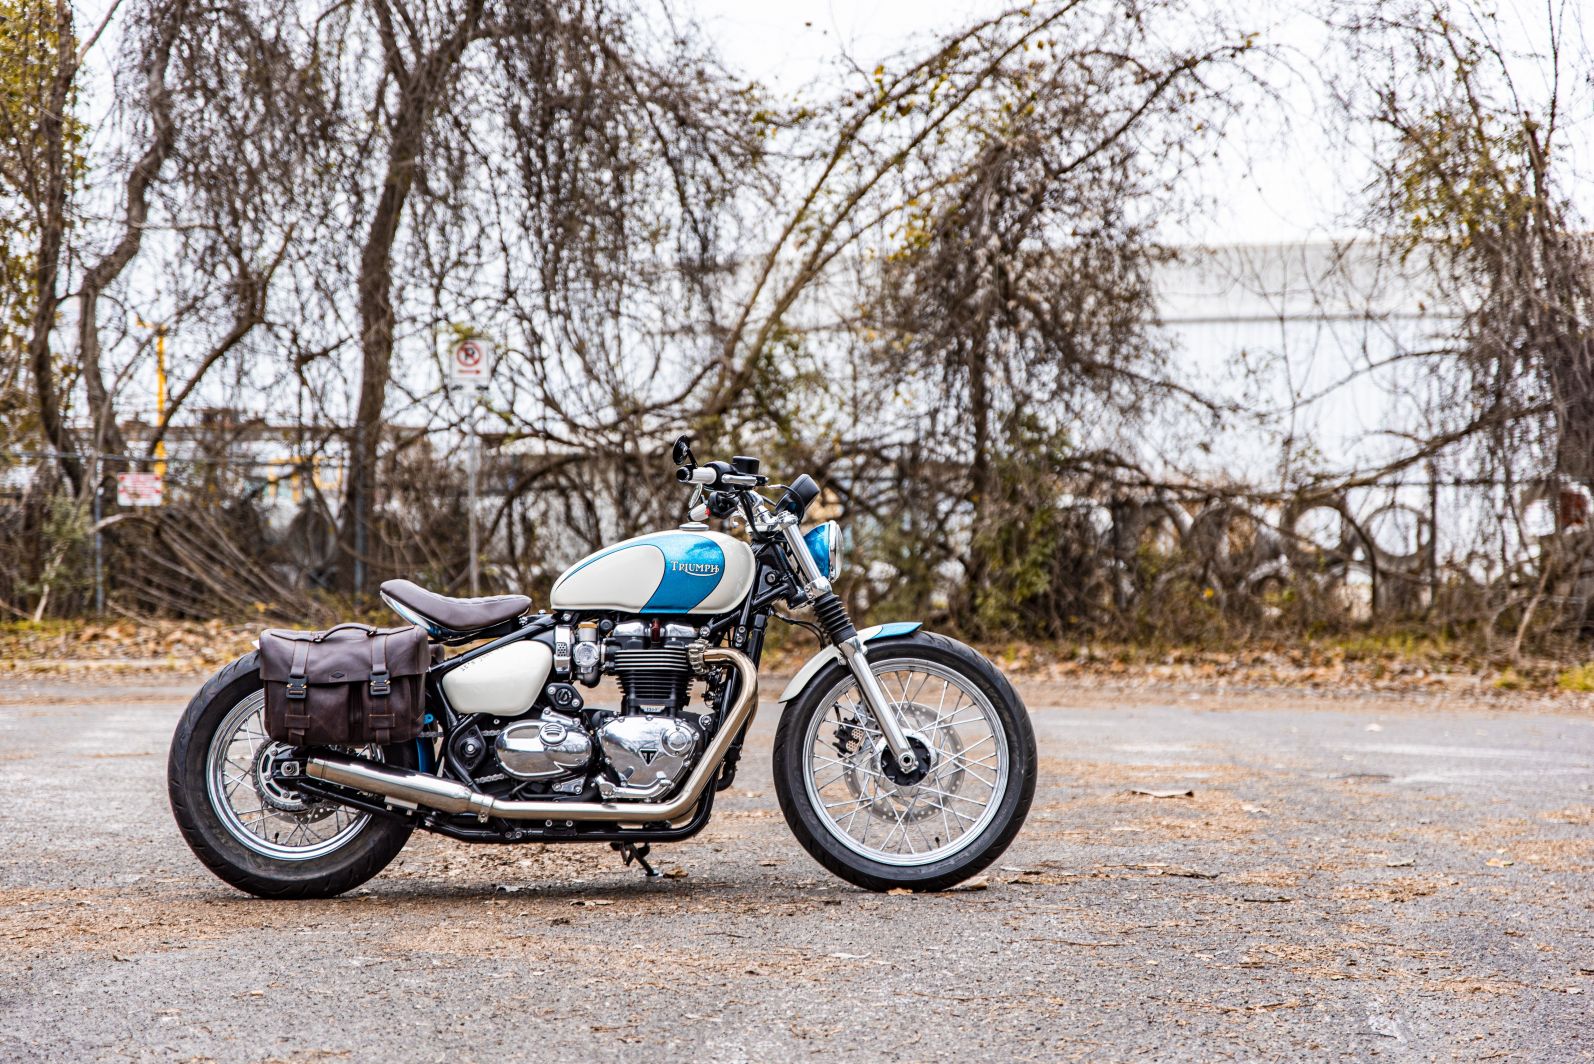 Revival Cycles Made This 2019 Triumph Bobber Look Like a Timeless